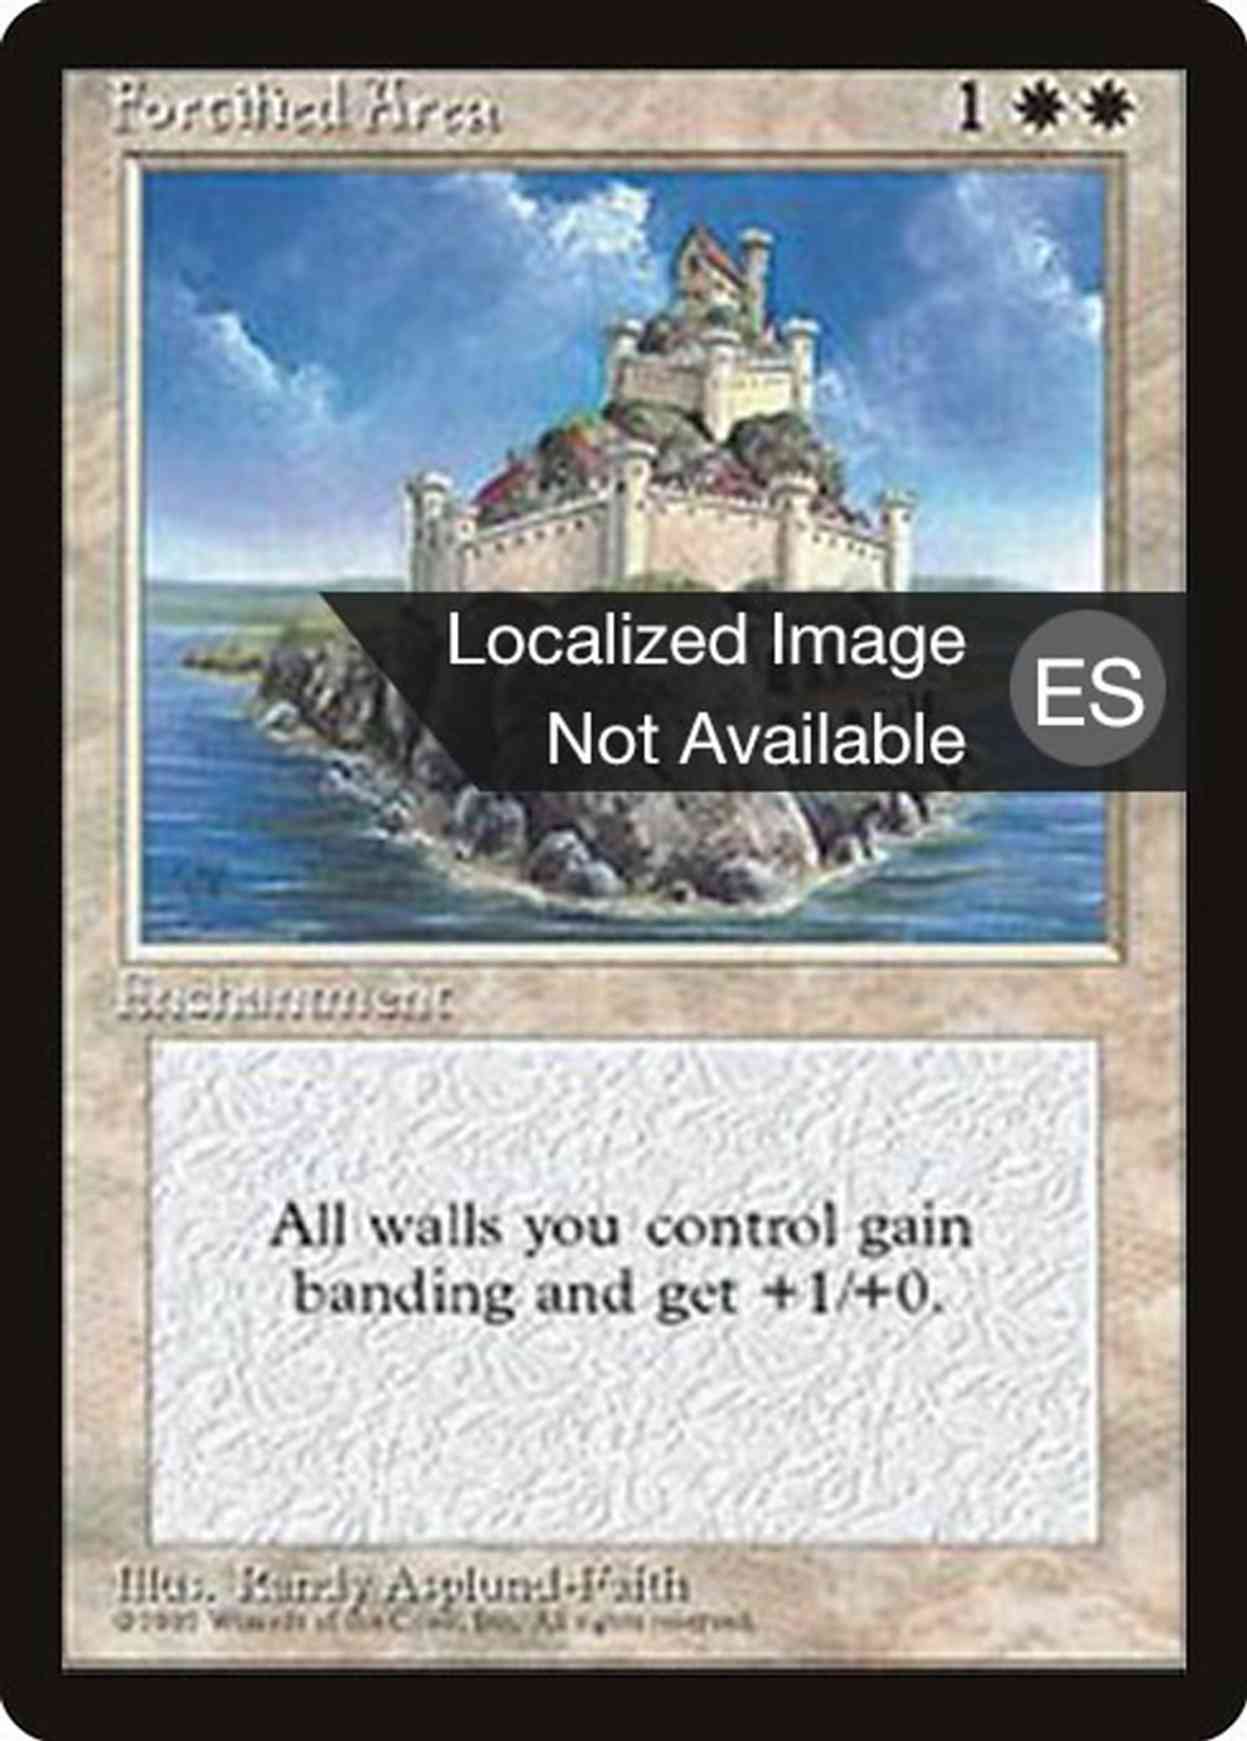 Fortified Area magic card front